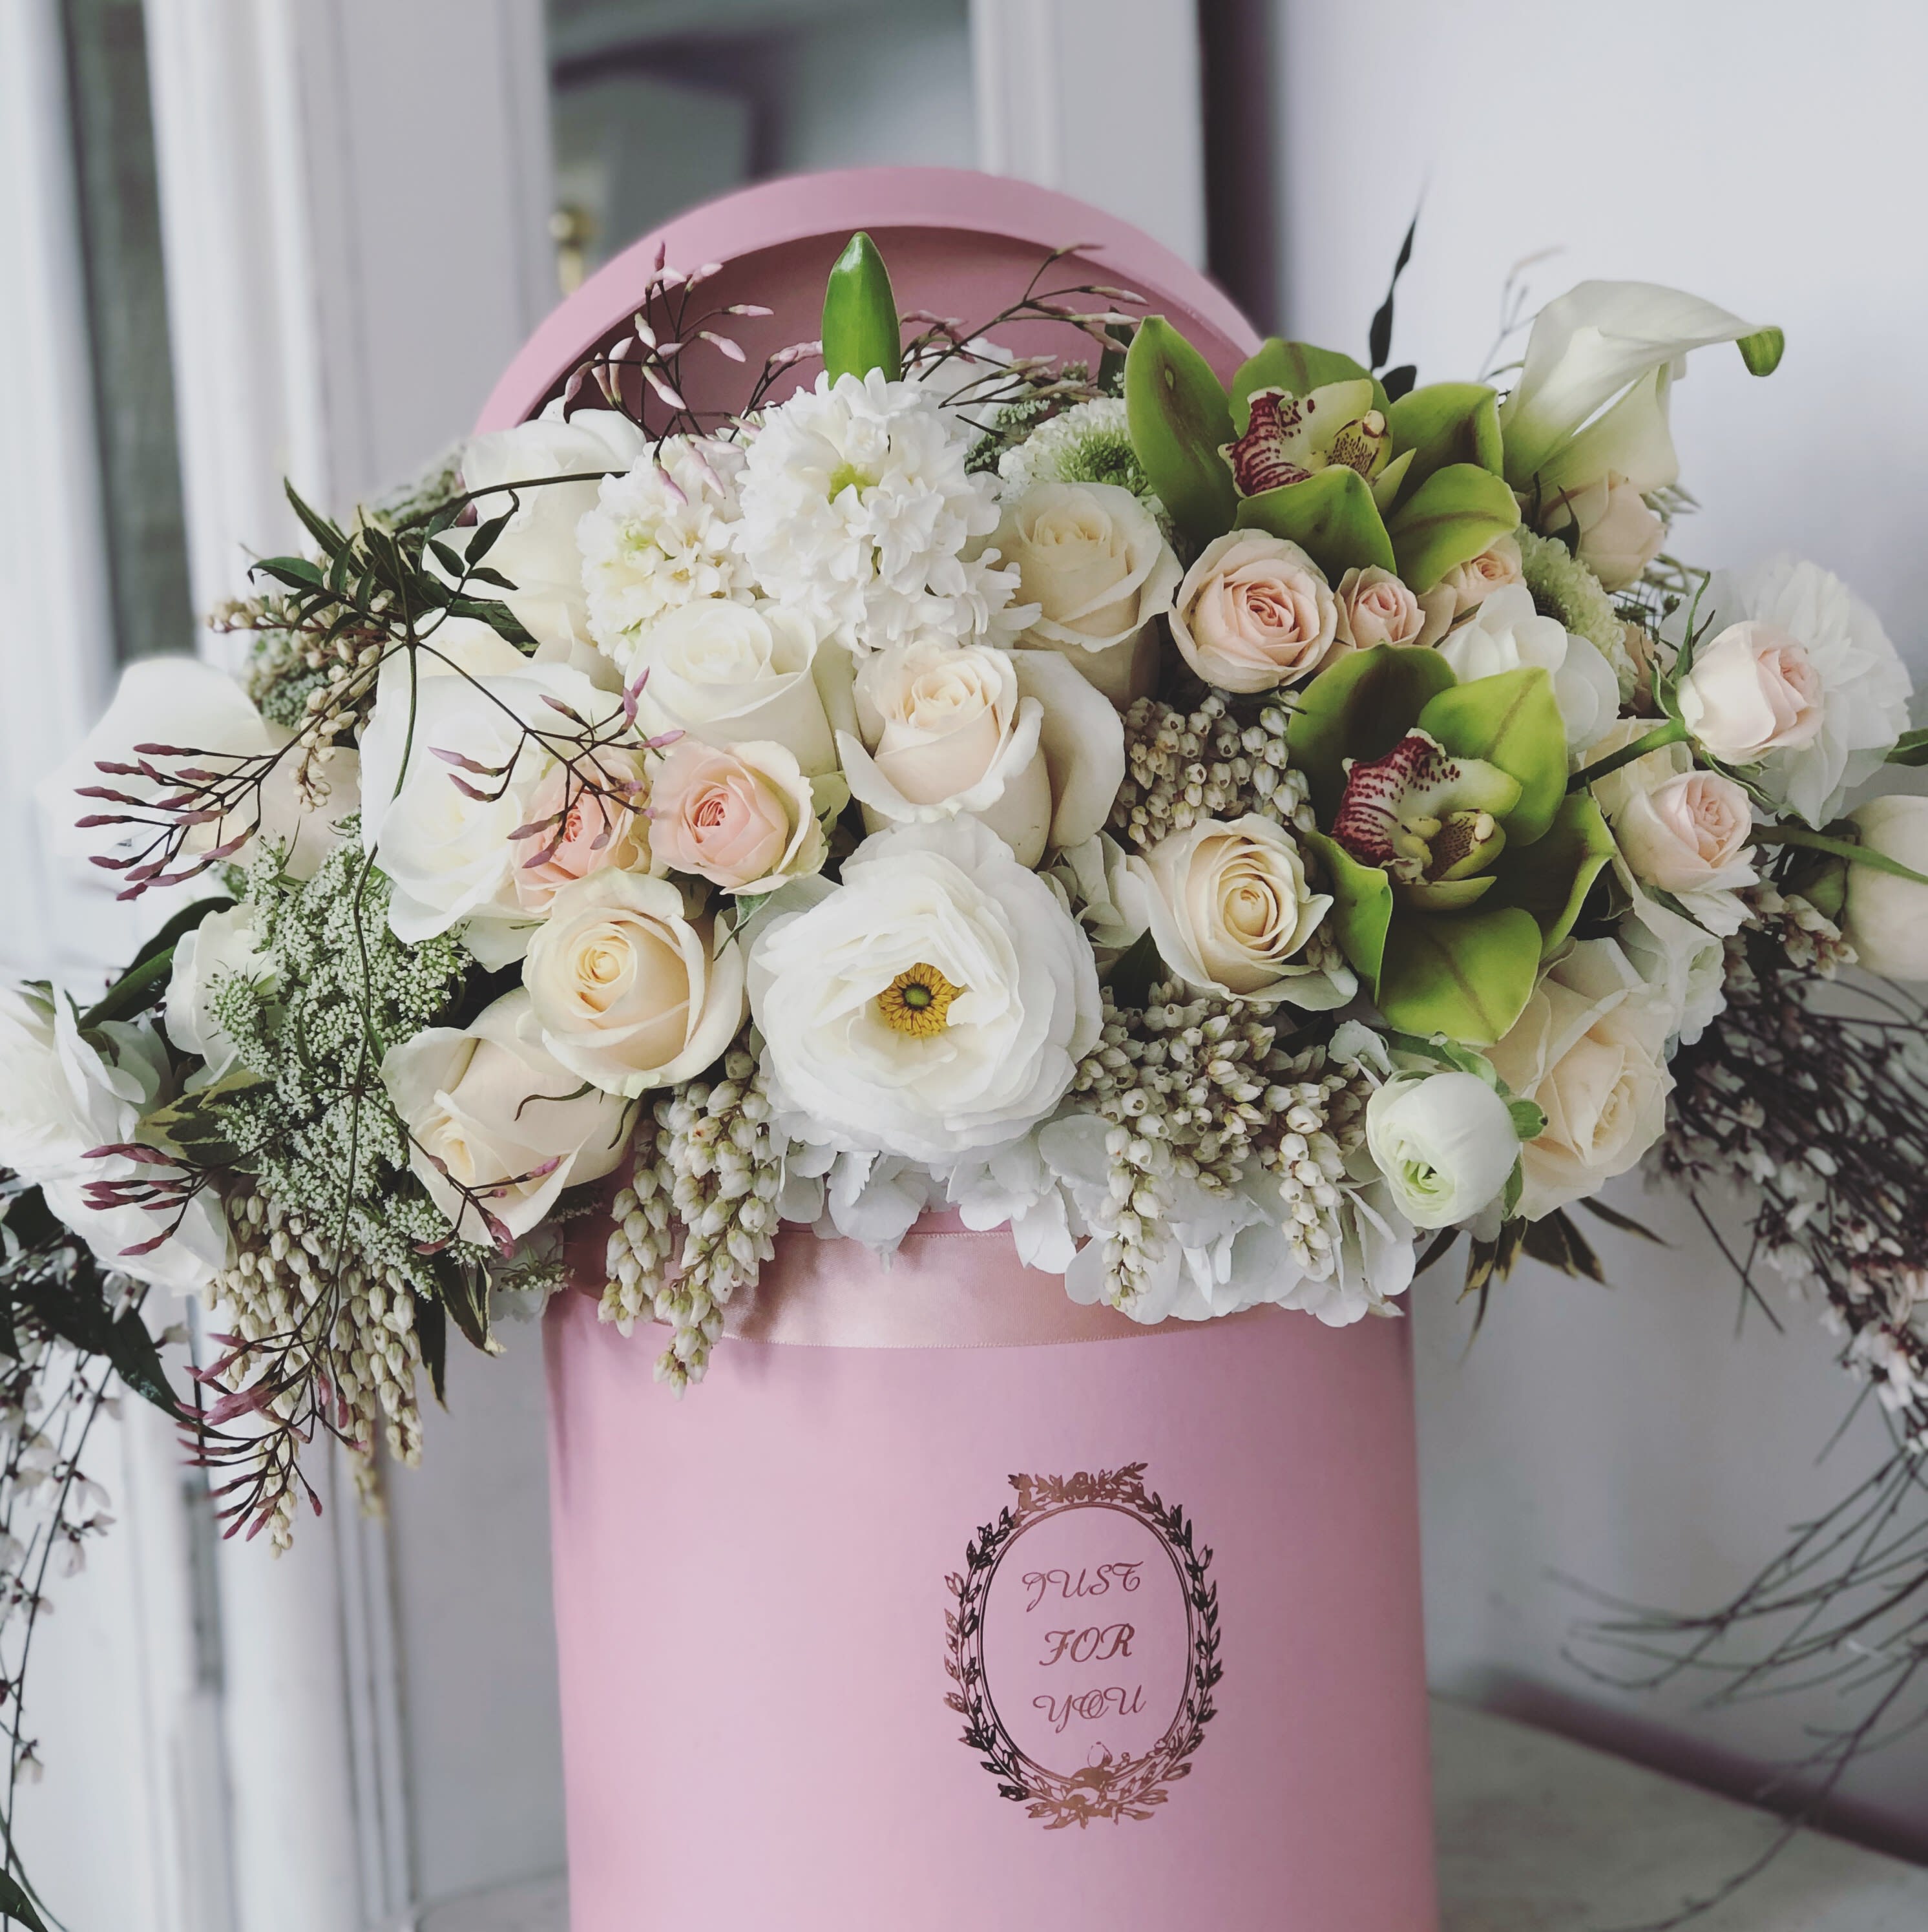 Glendale - Gorgeous box filled with beautiful seasonal white and green, pink romantic flowers. Boxed arrangements are very popular and thoughtful gift for your loved ones.